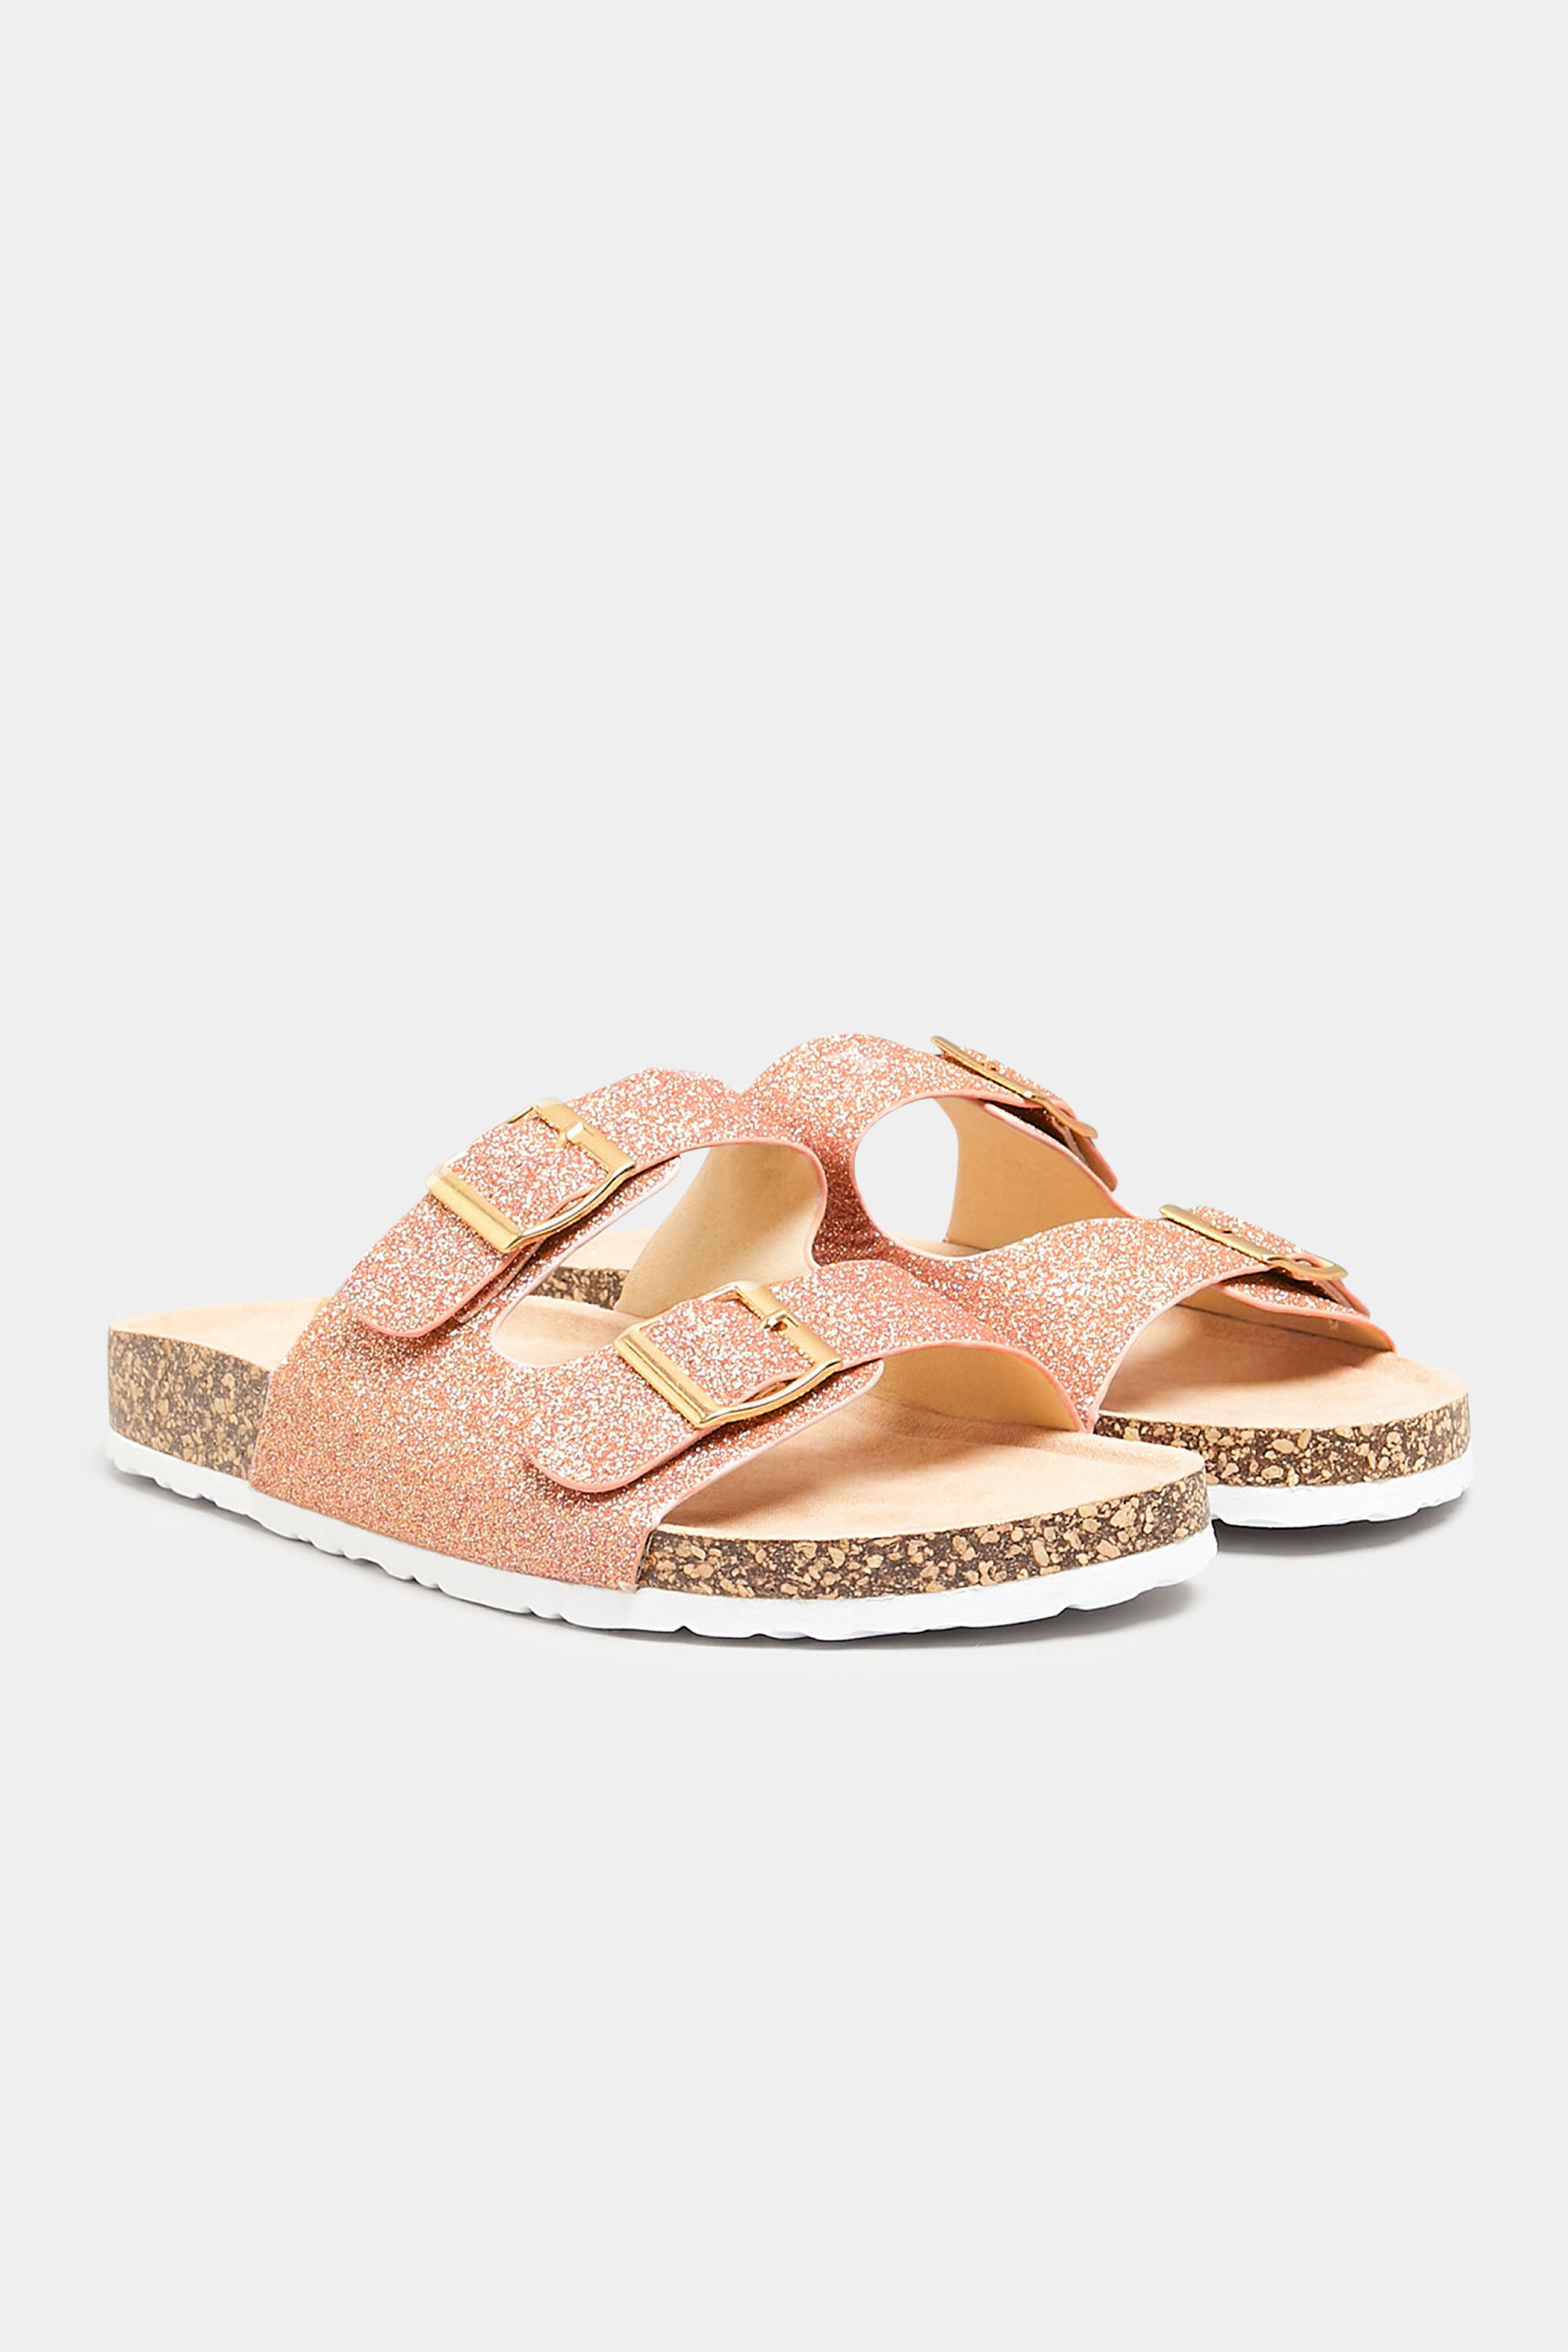 Pink Glitter Buckle Strap Footbed Sandals In Extra Wide EEE Fit_A.jpg